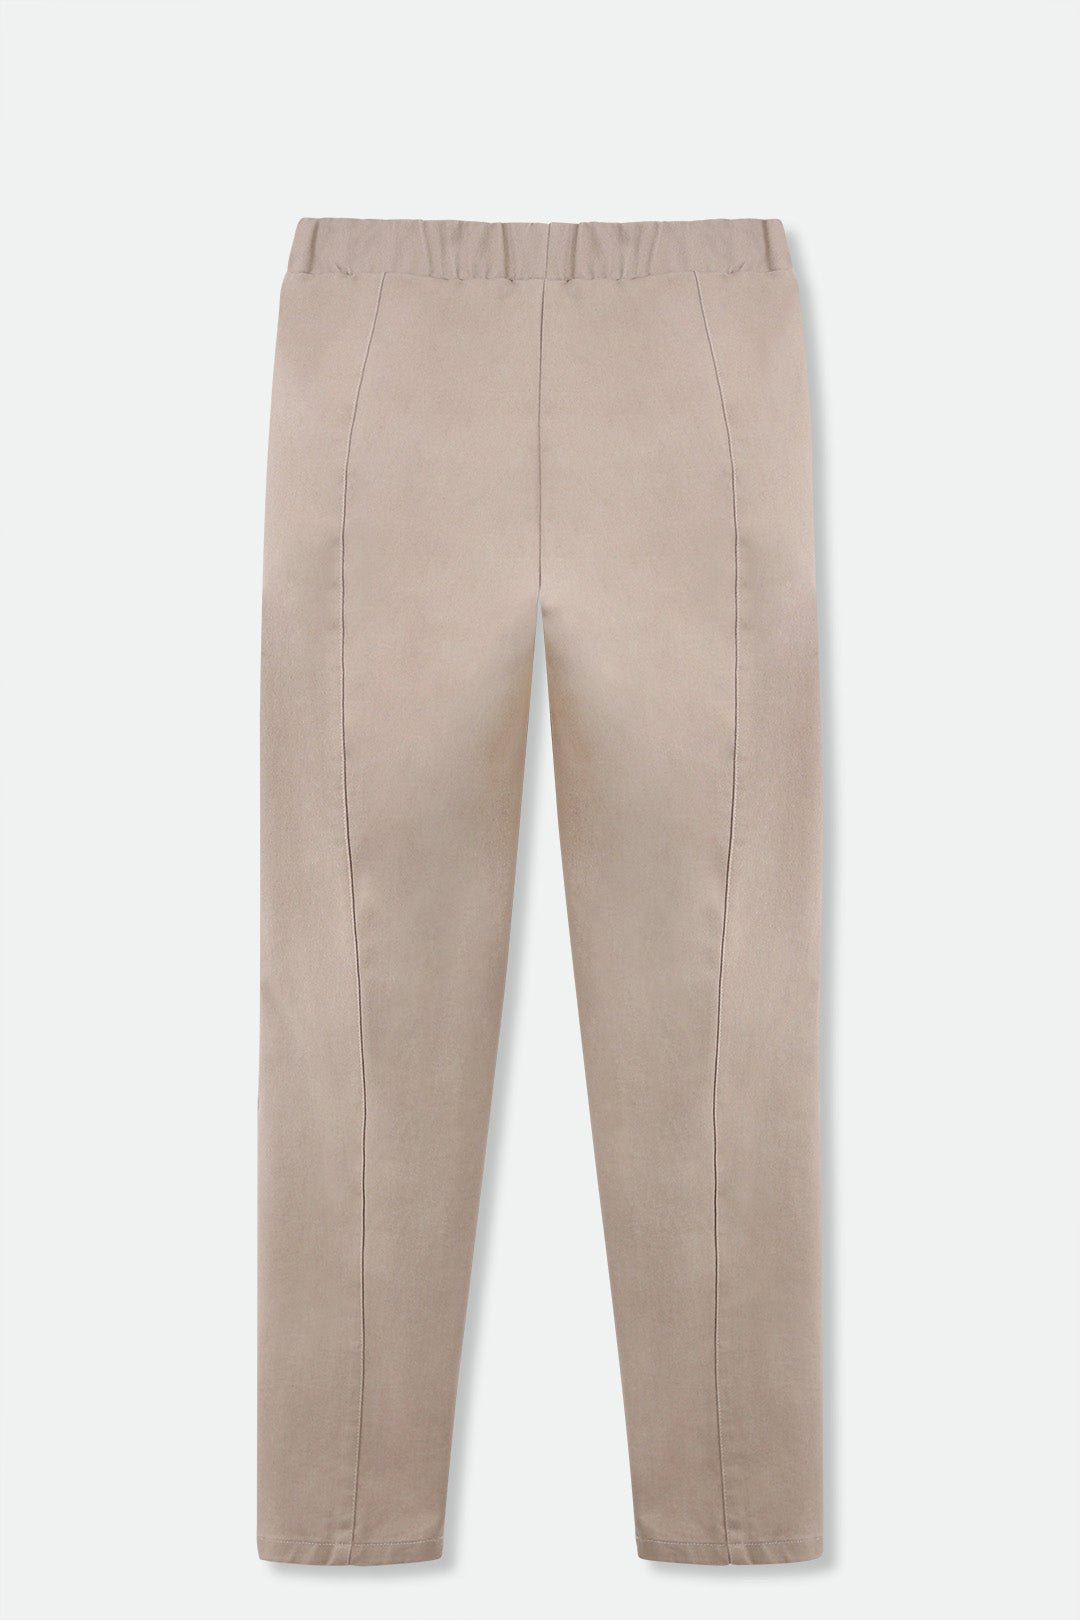 PERRYN PANT IN TECHNICAL COTTON STRETCH IN PINK BEIGE - Jarbo